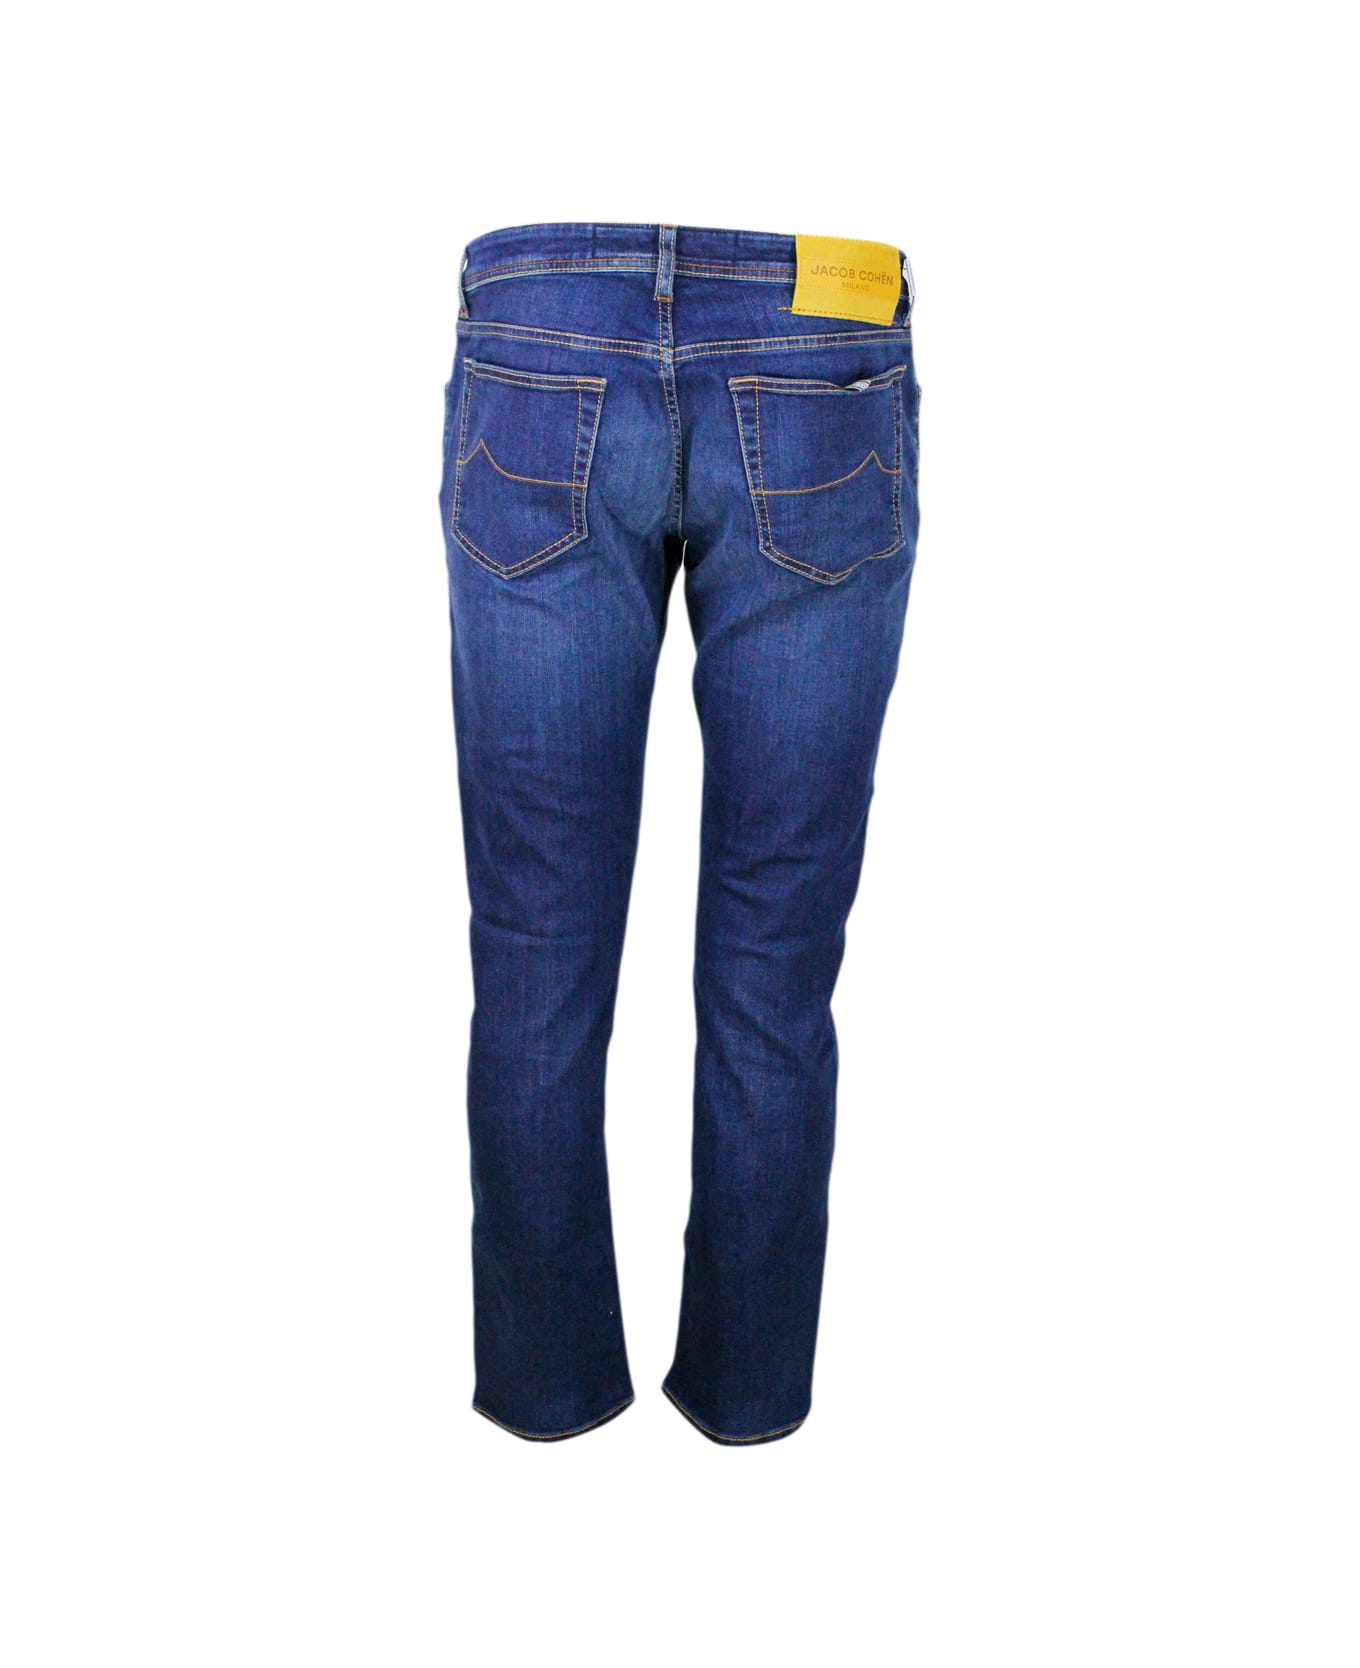 Jacob Cohen Bard J688 Trousers In Luxury Edition Denim In Soft Stretch Denim With 5 Pockets With Closure Buttons And Special Lacquered Button, Pony Skin Label Wit - Denim